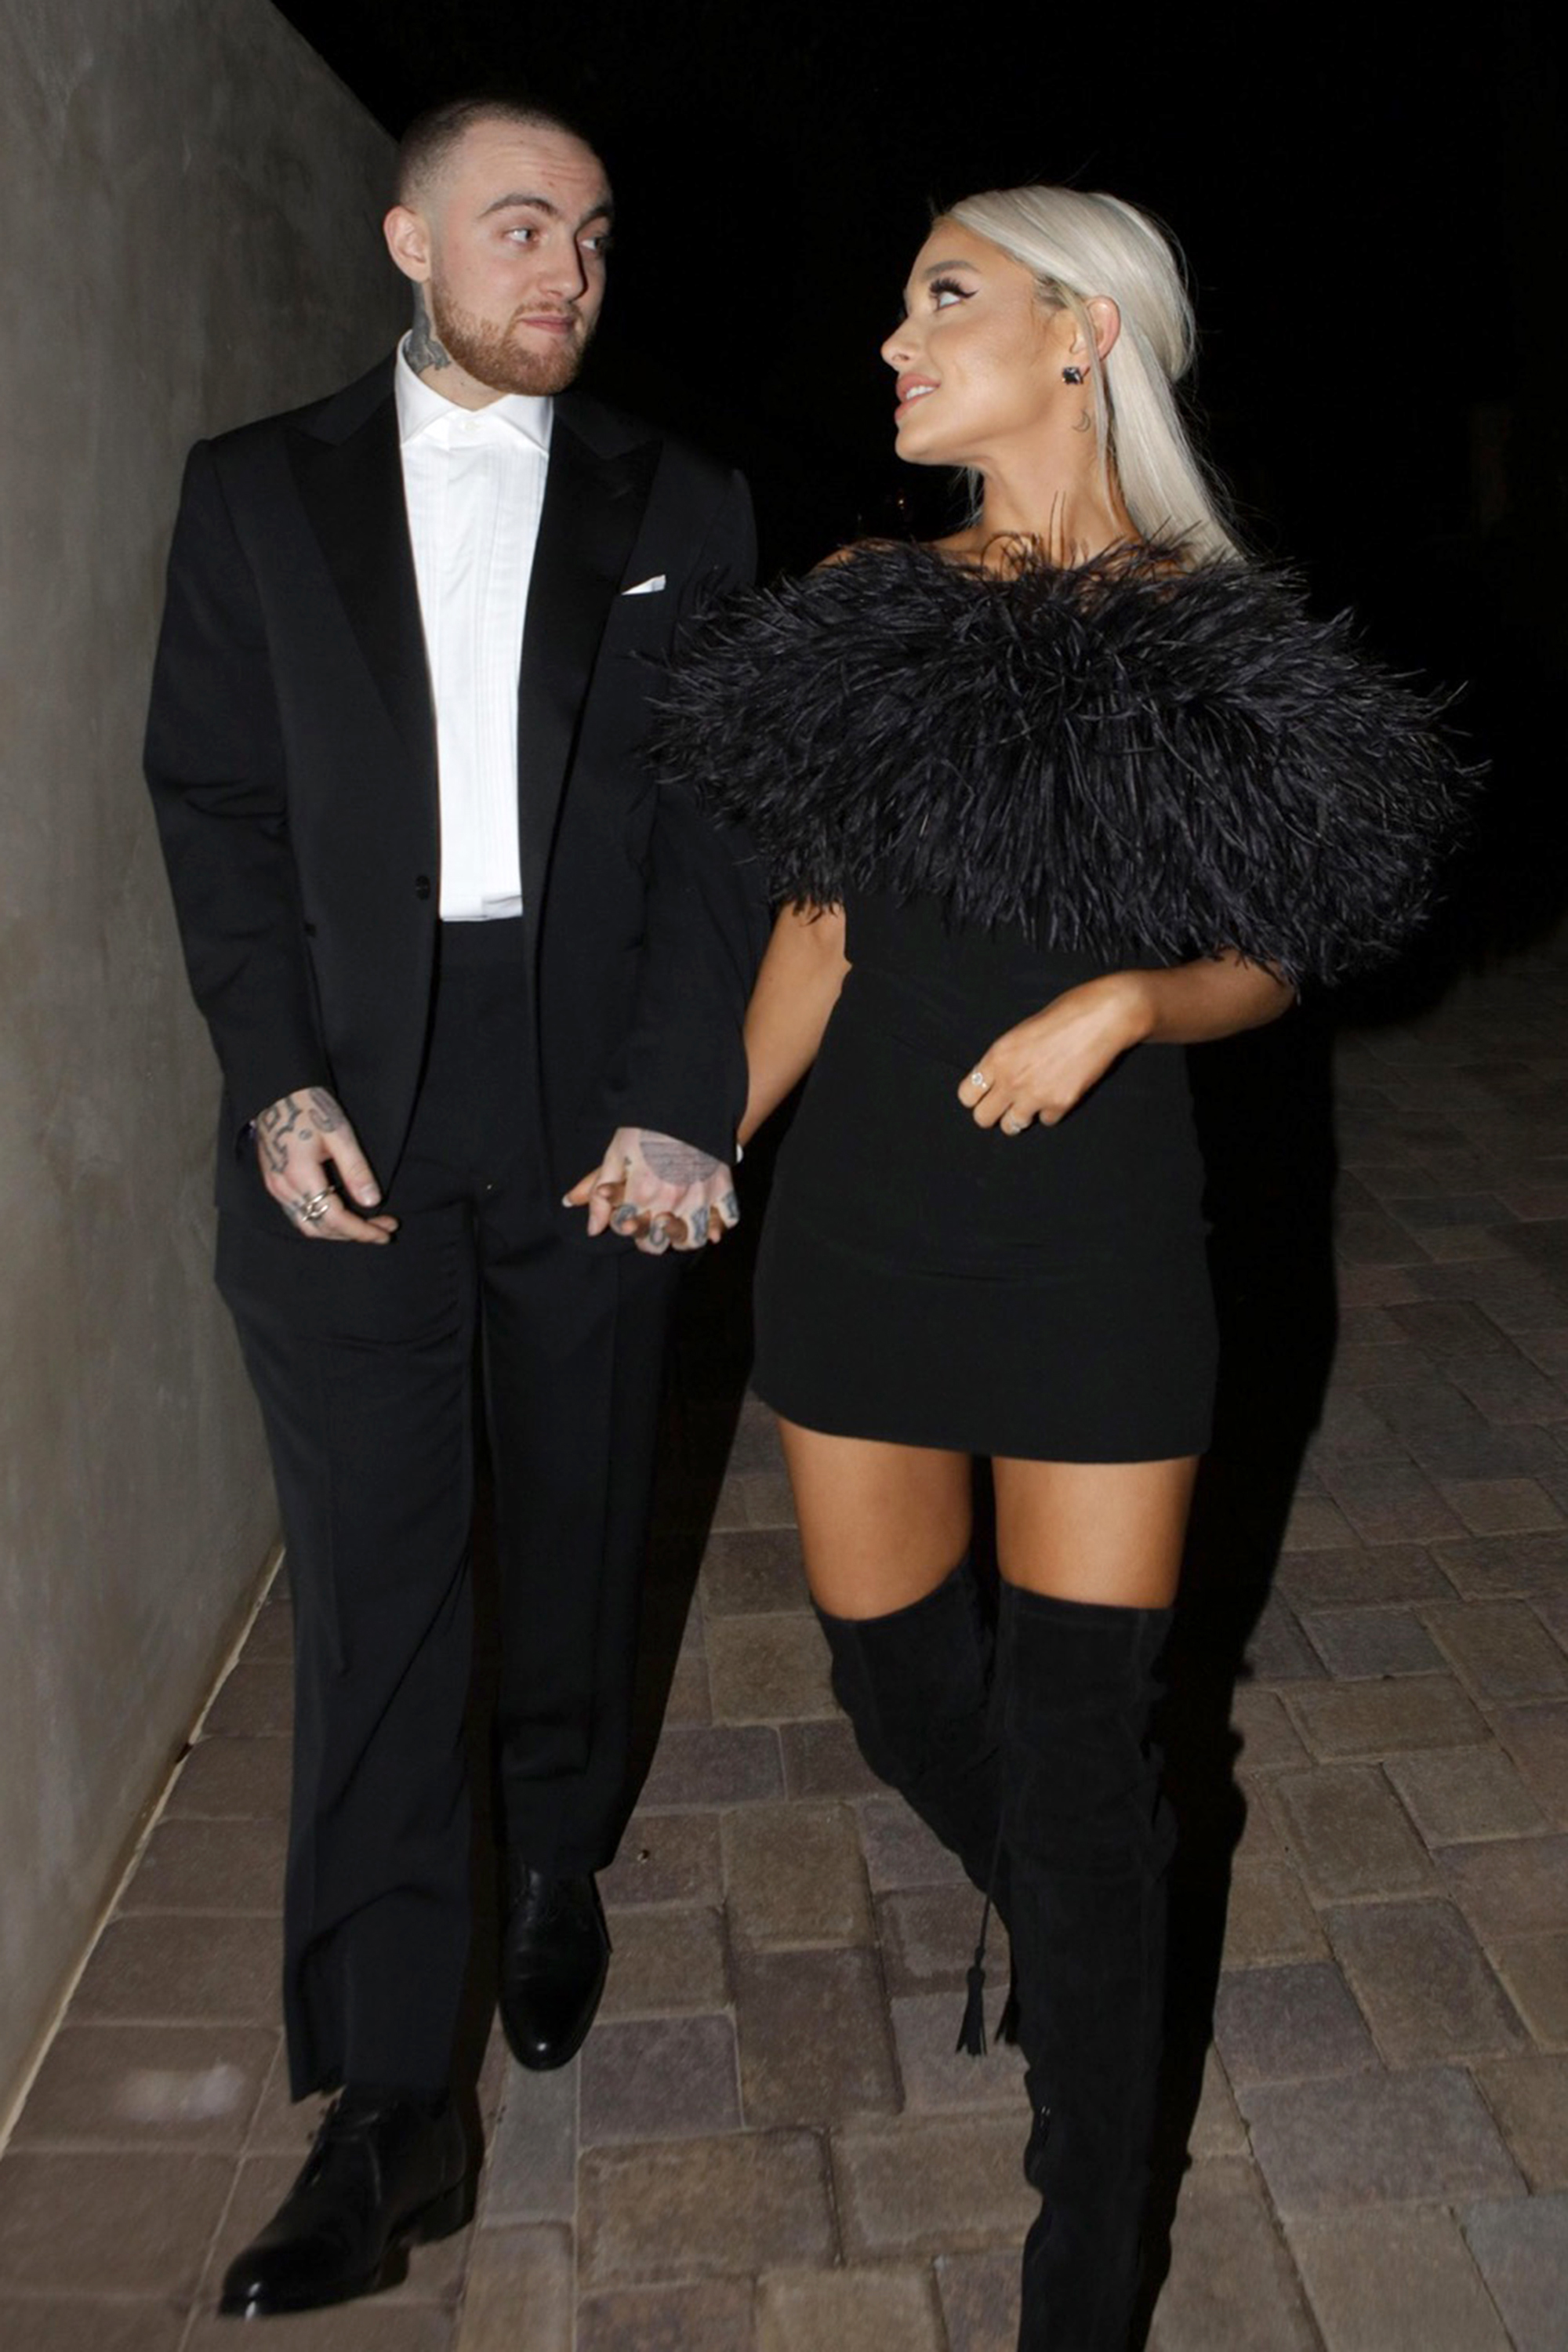 Mac Miller and Ariana Grande pictured attending an Oscar party on March 4, 2018 in Los Angeles, California | Source: Getty Images